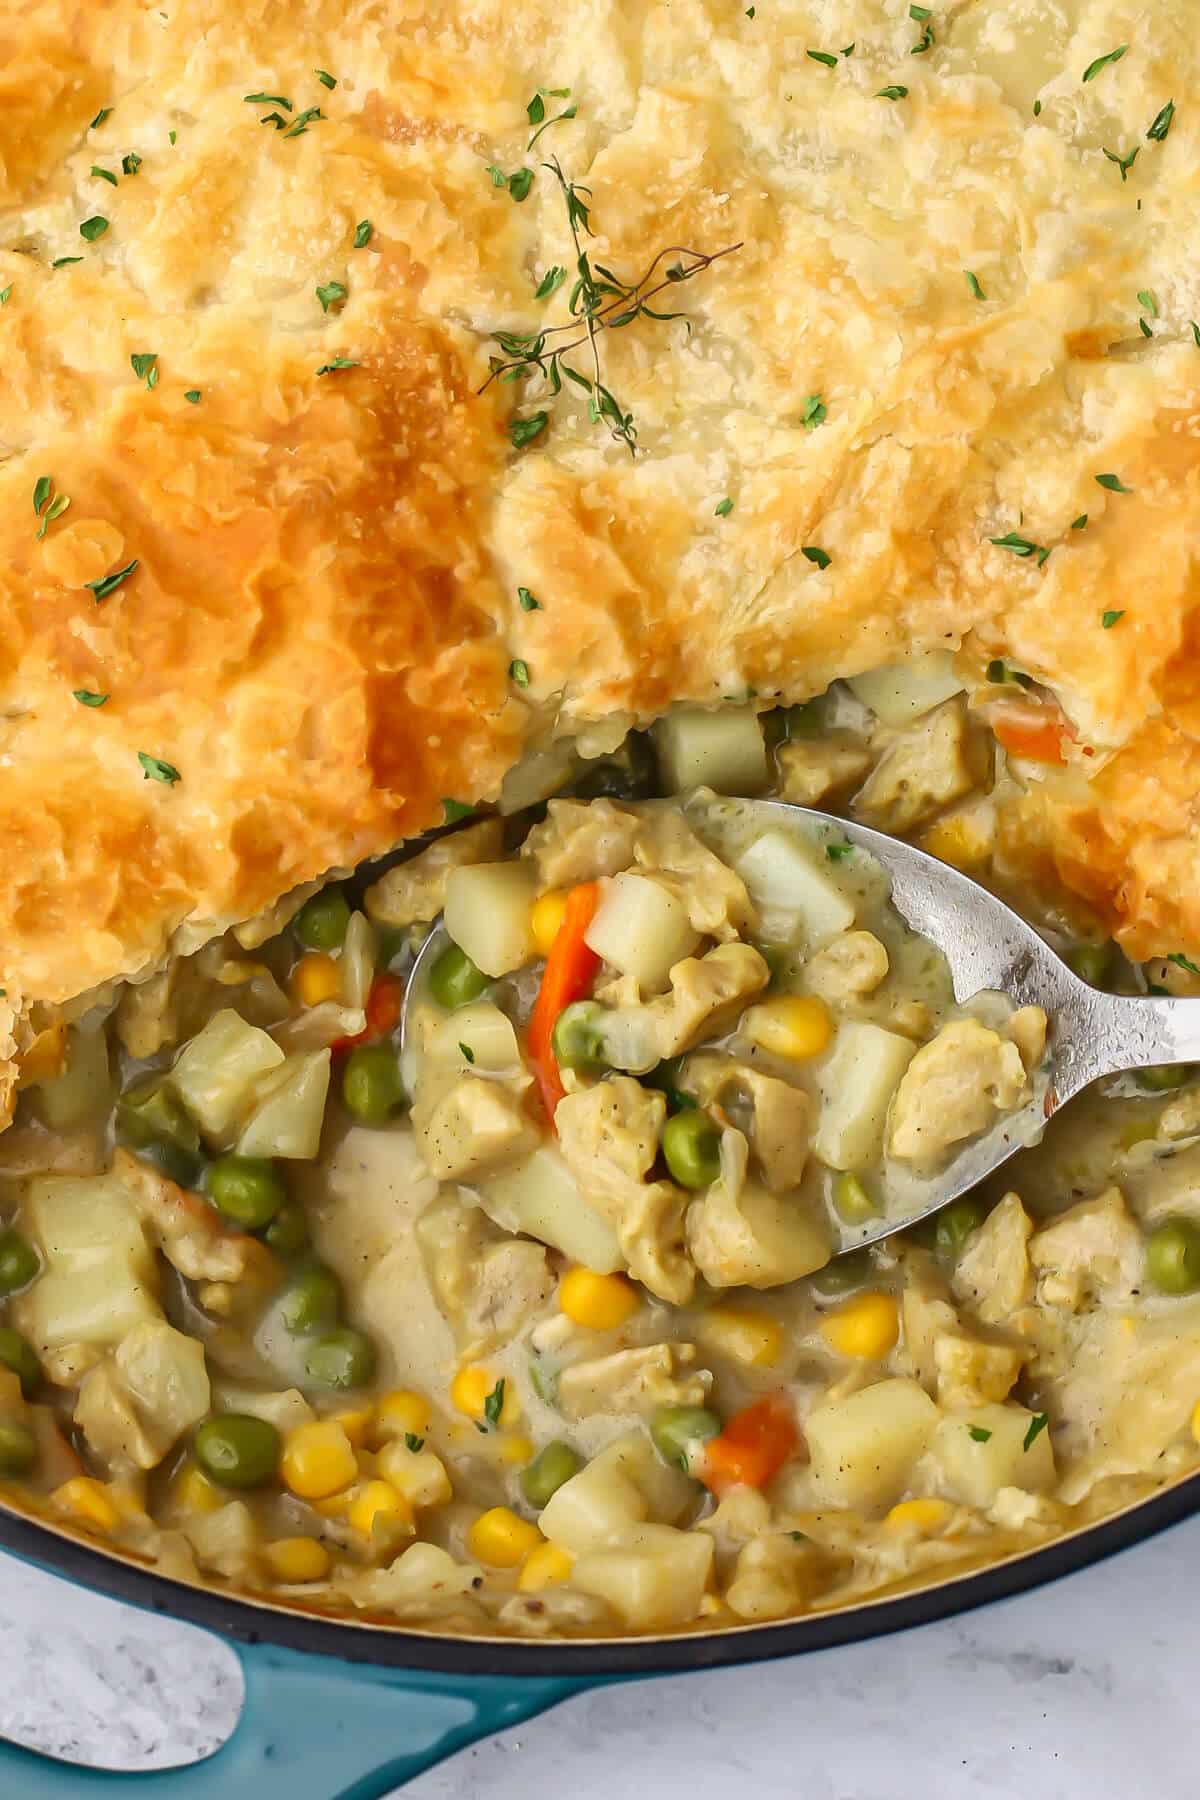 A close up of a vegan pot pie with a puff pastry topping.